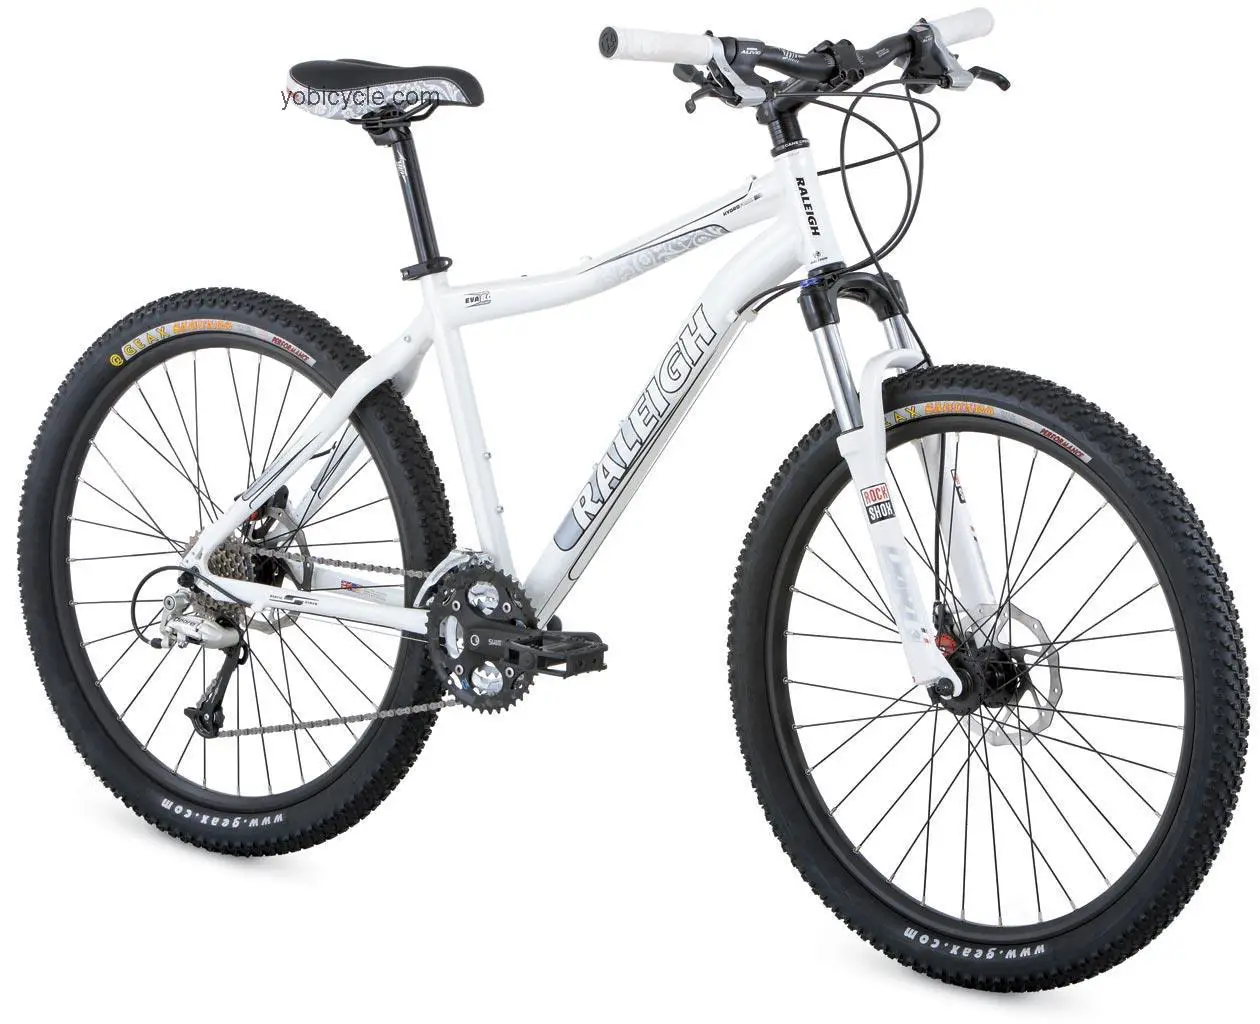 Raleigh Eva 8.0 2009 comparison online with competitors